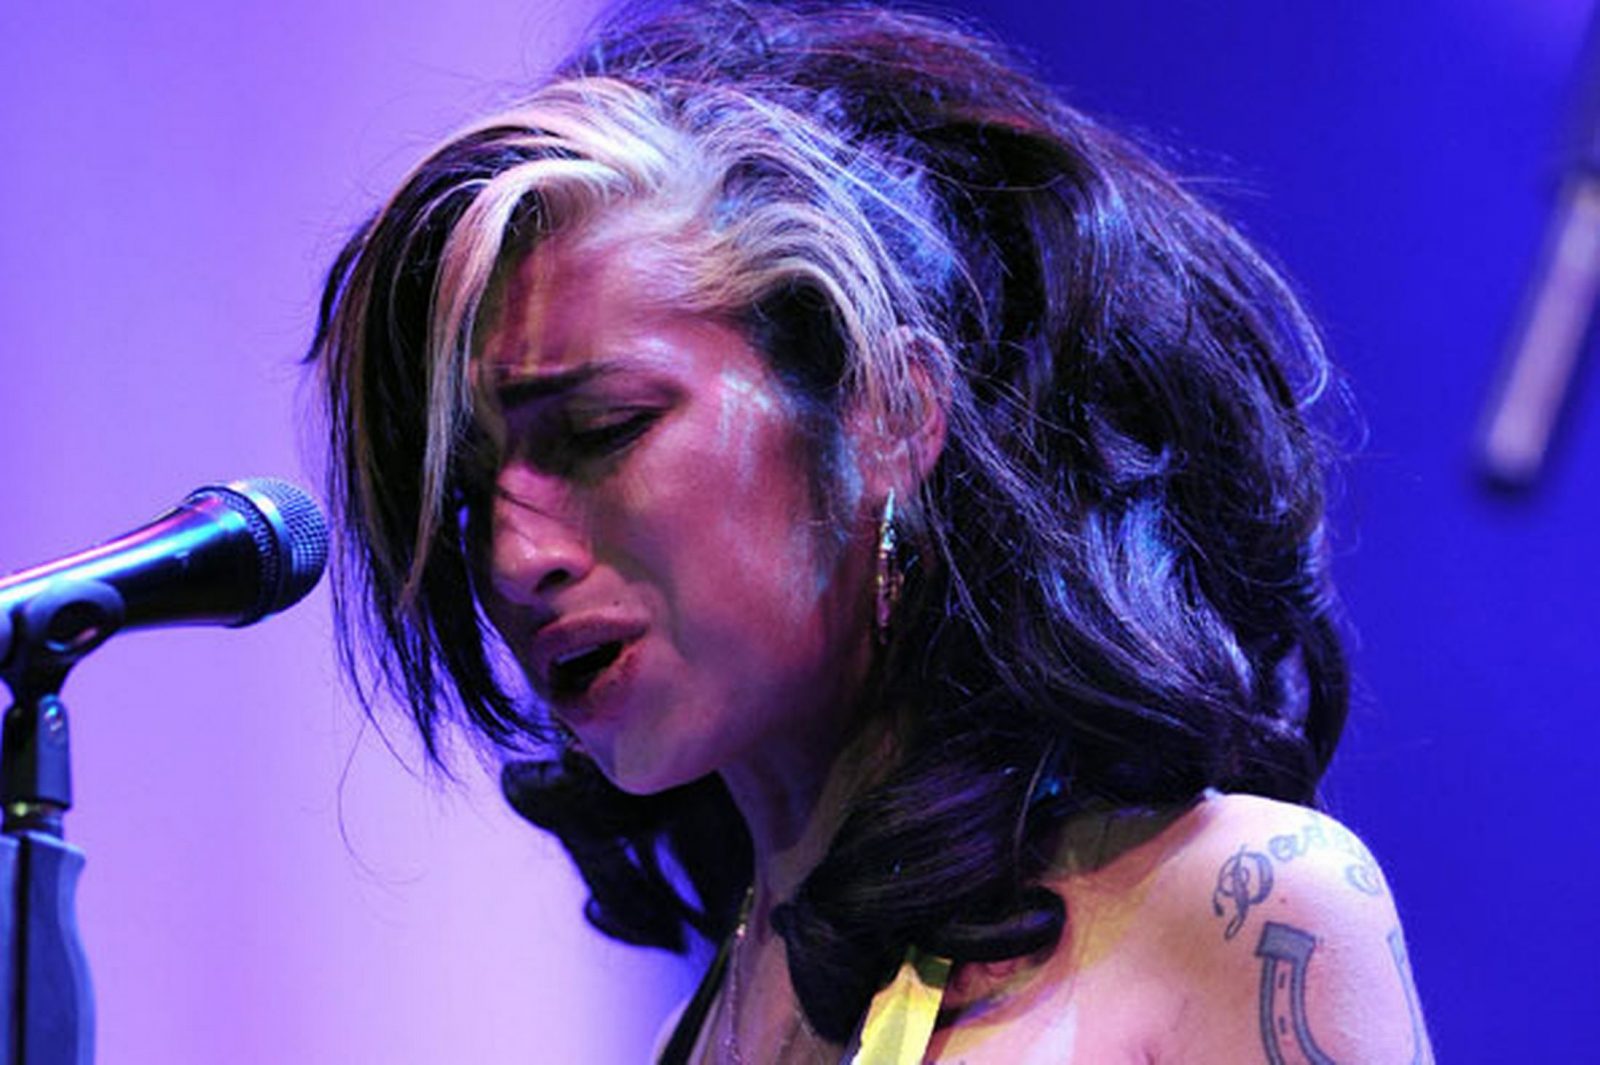 amy-winehouse-in-concert-serbia-june-2011-pic-rex-489016608